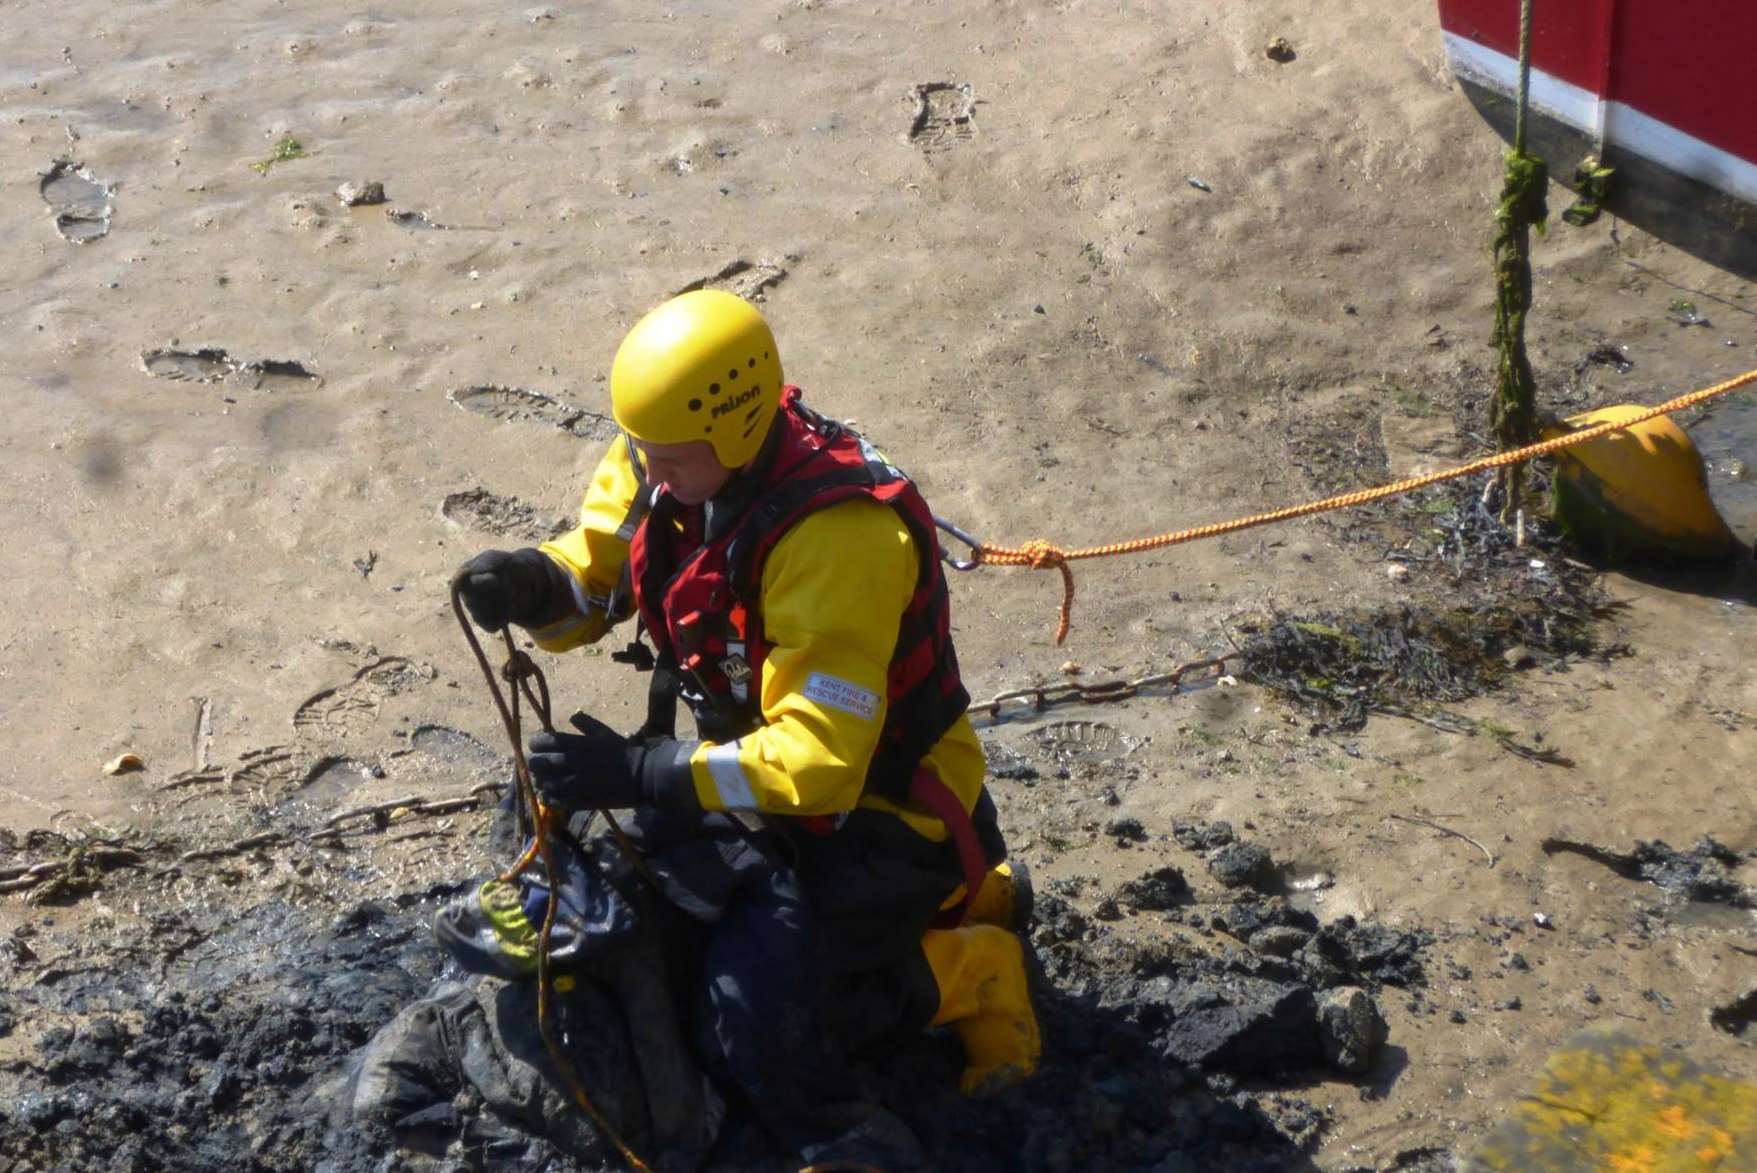 Emergency service crews had to save a dummy from the mud